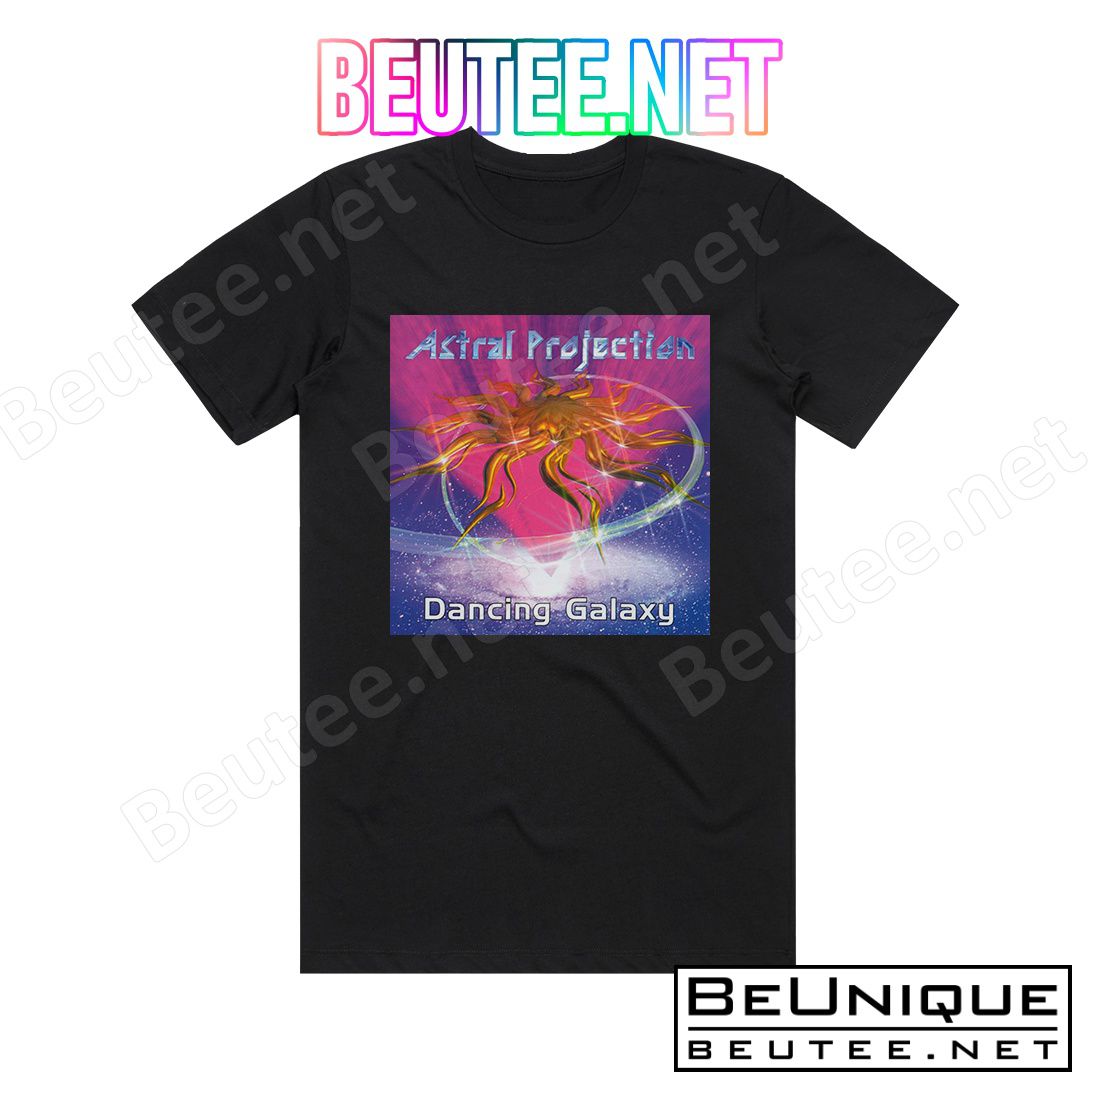 Astral Projection Dancing Galaxy Album Cover T-Shirt